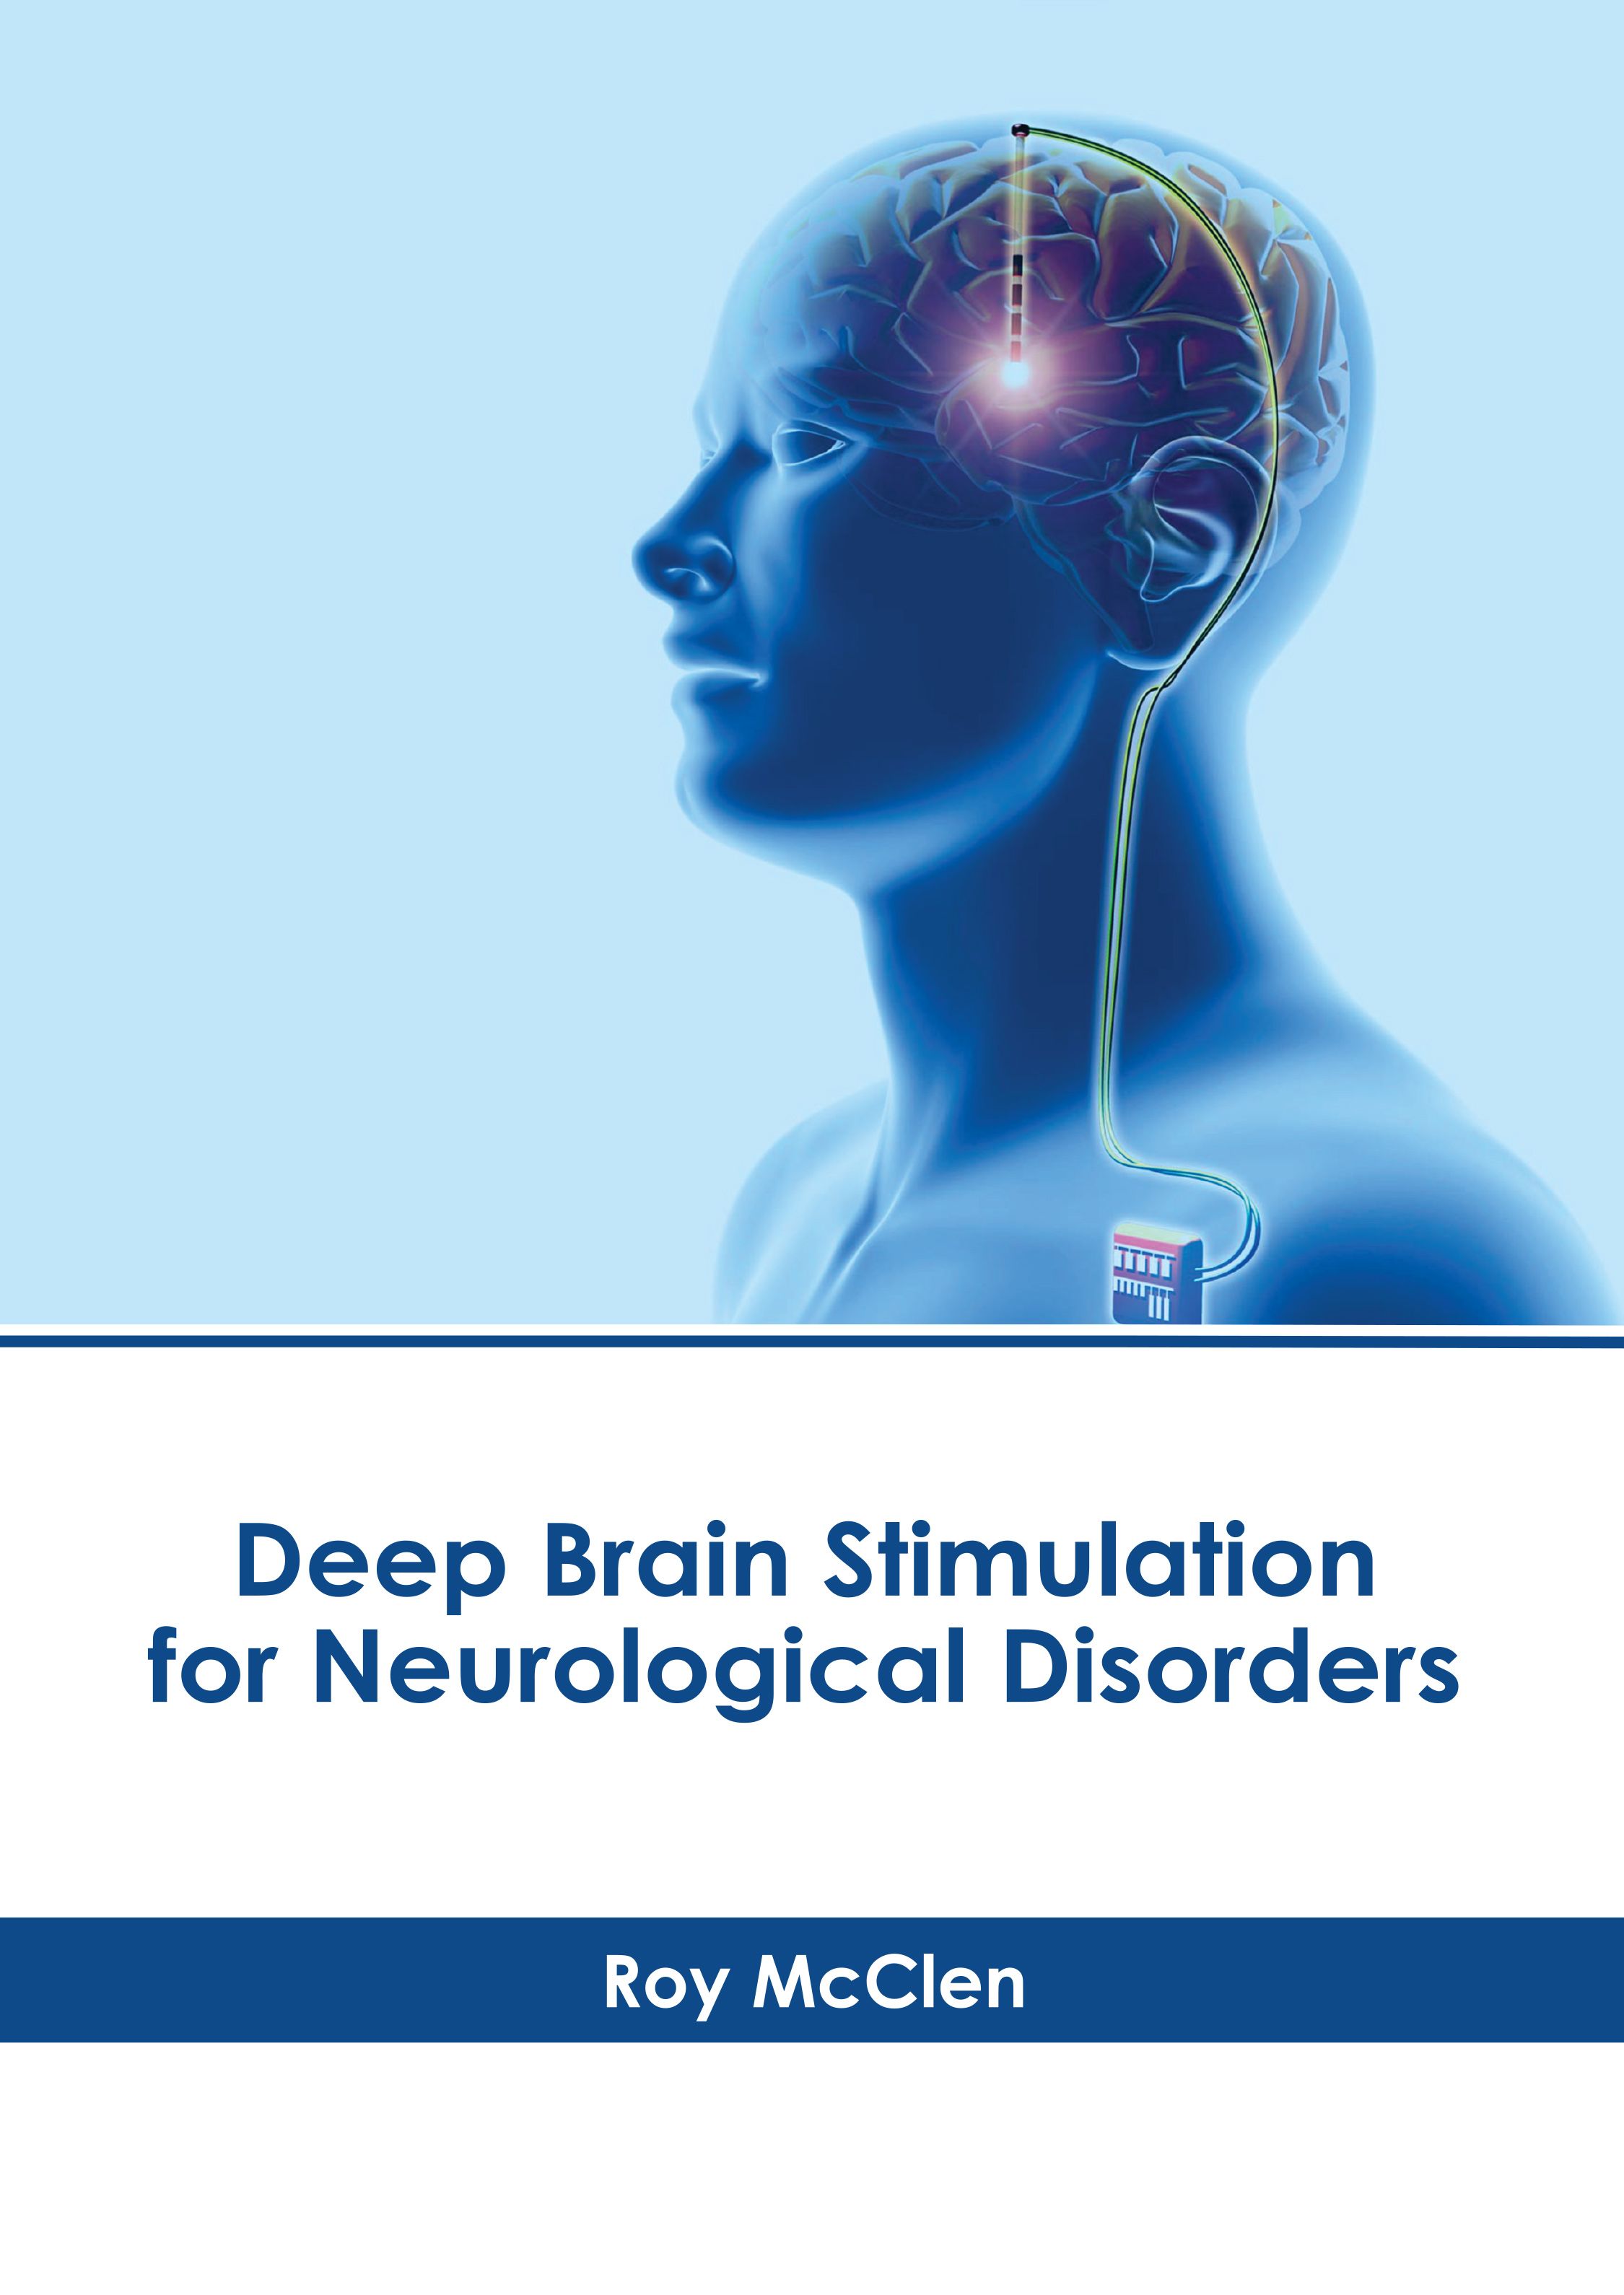 

exclusive-publishers/american-medical-publishers/deep-brain-stimulation-for-neurological-disorders-9781639276516